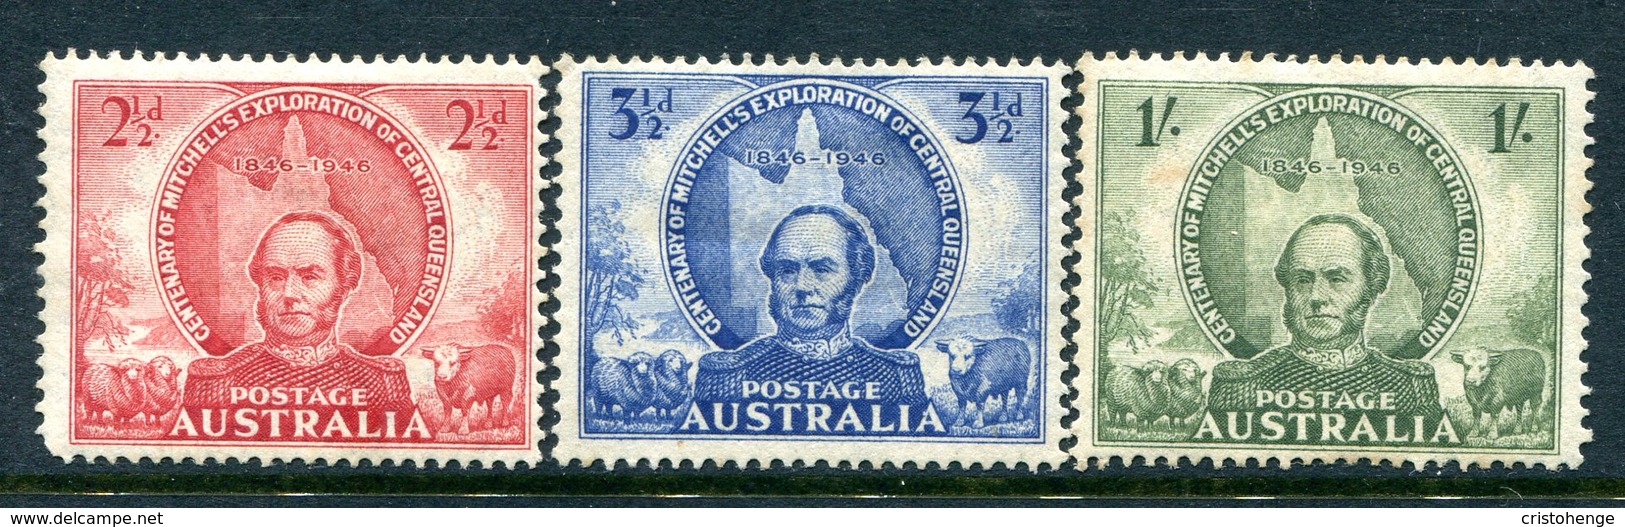 Australia 1946 Centenary Of Mitchell's Exploration Of Central Queensland Set HM (SG 216-218) - Mint Stamps